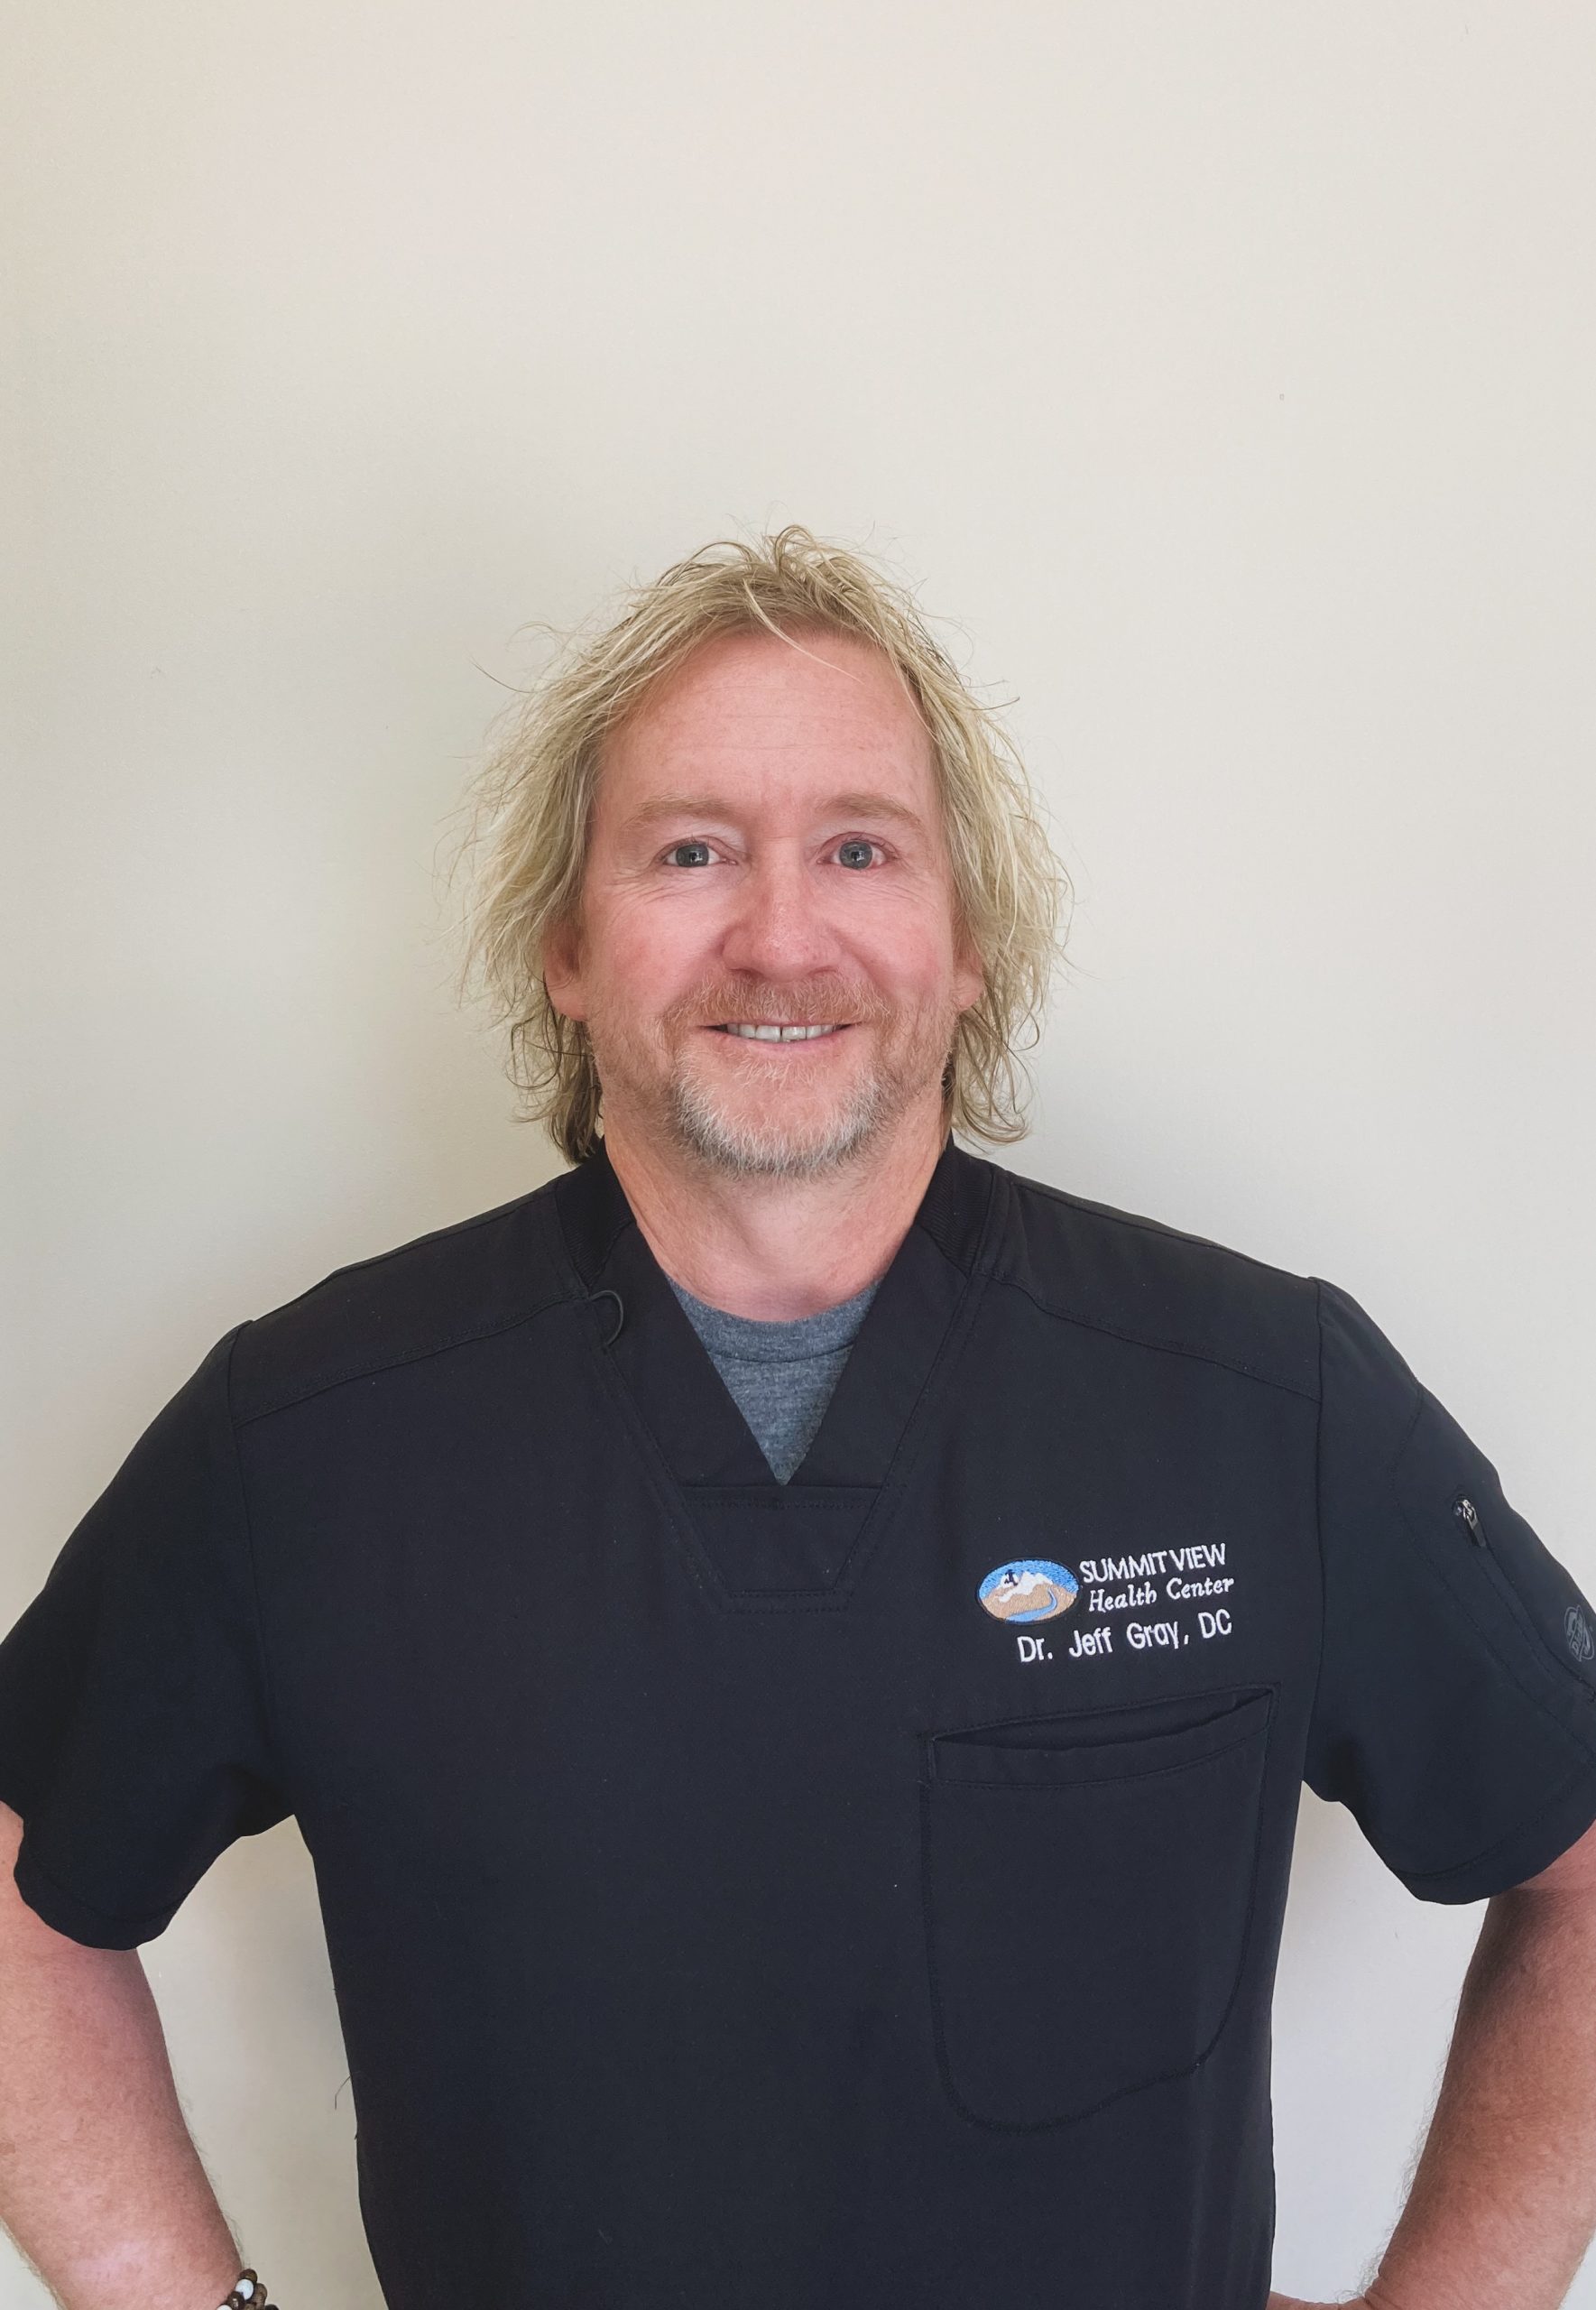 Dr Jeff Gray - Chiropractic Physician

